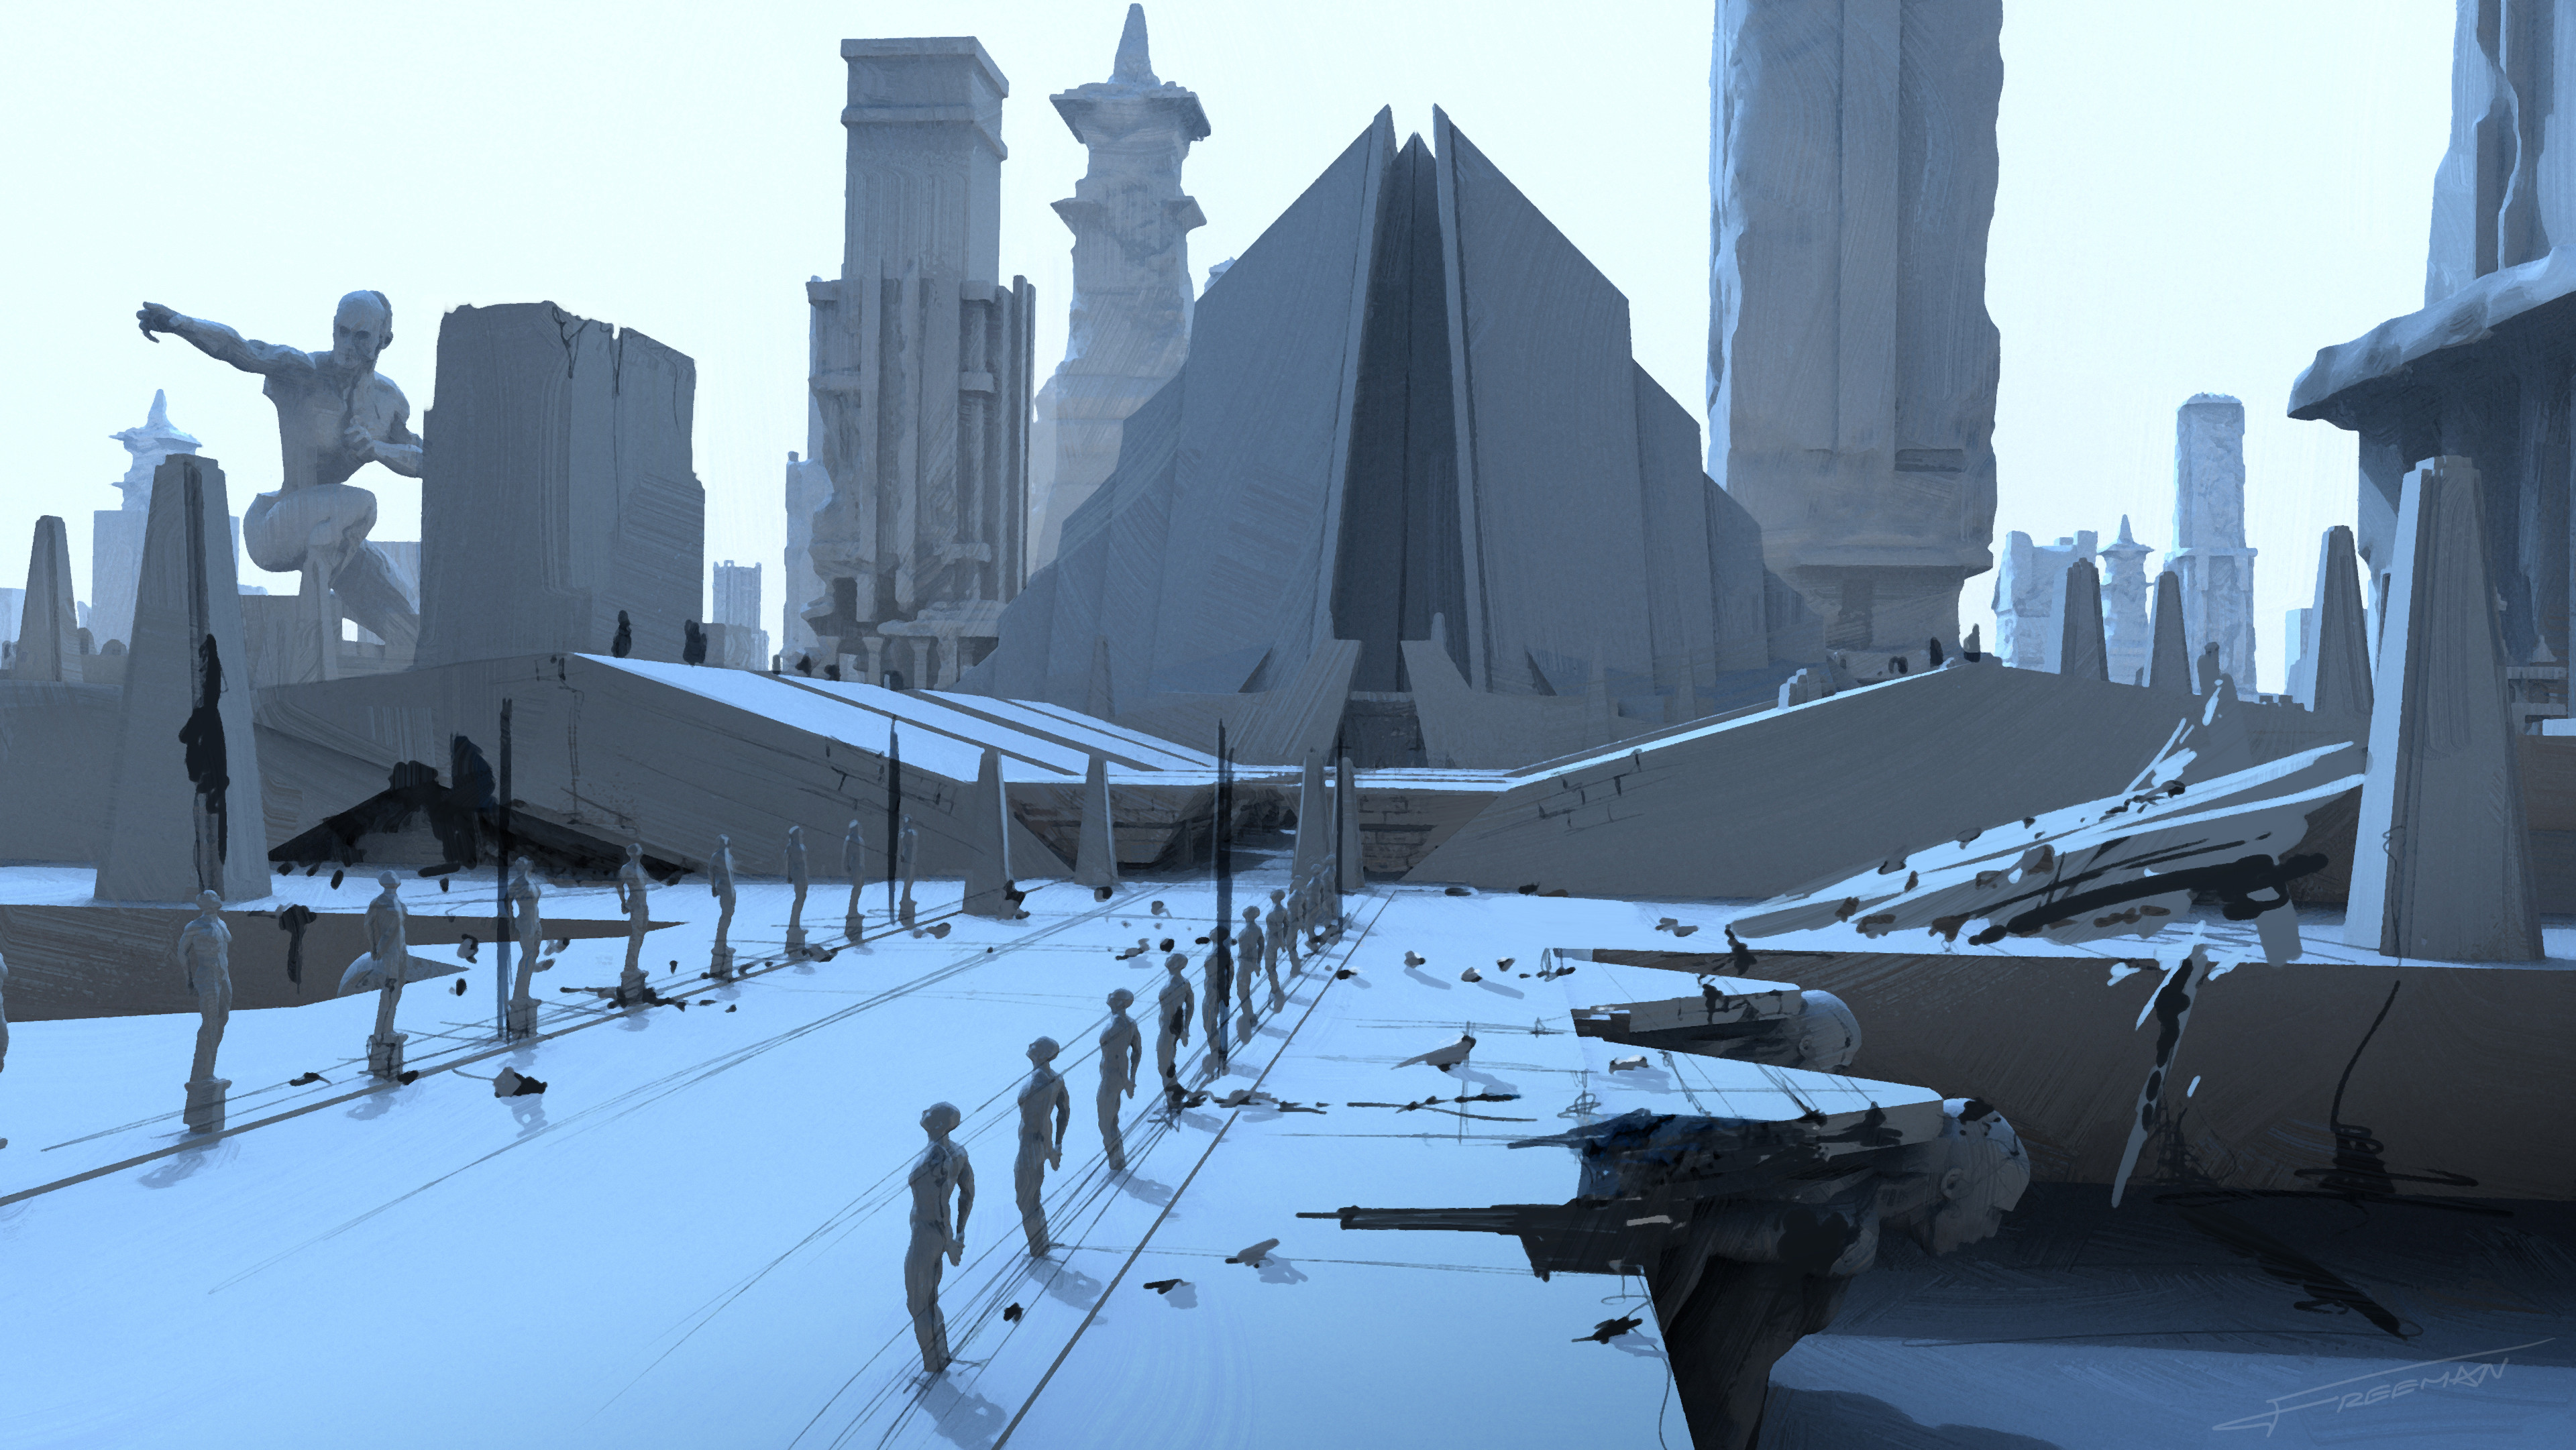 3D block out / concept sketch looking towards the Central Plaza and pyramid - home of the Wyrm and Crone.